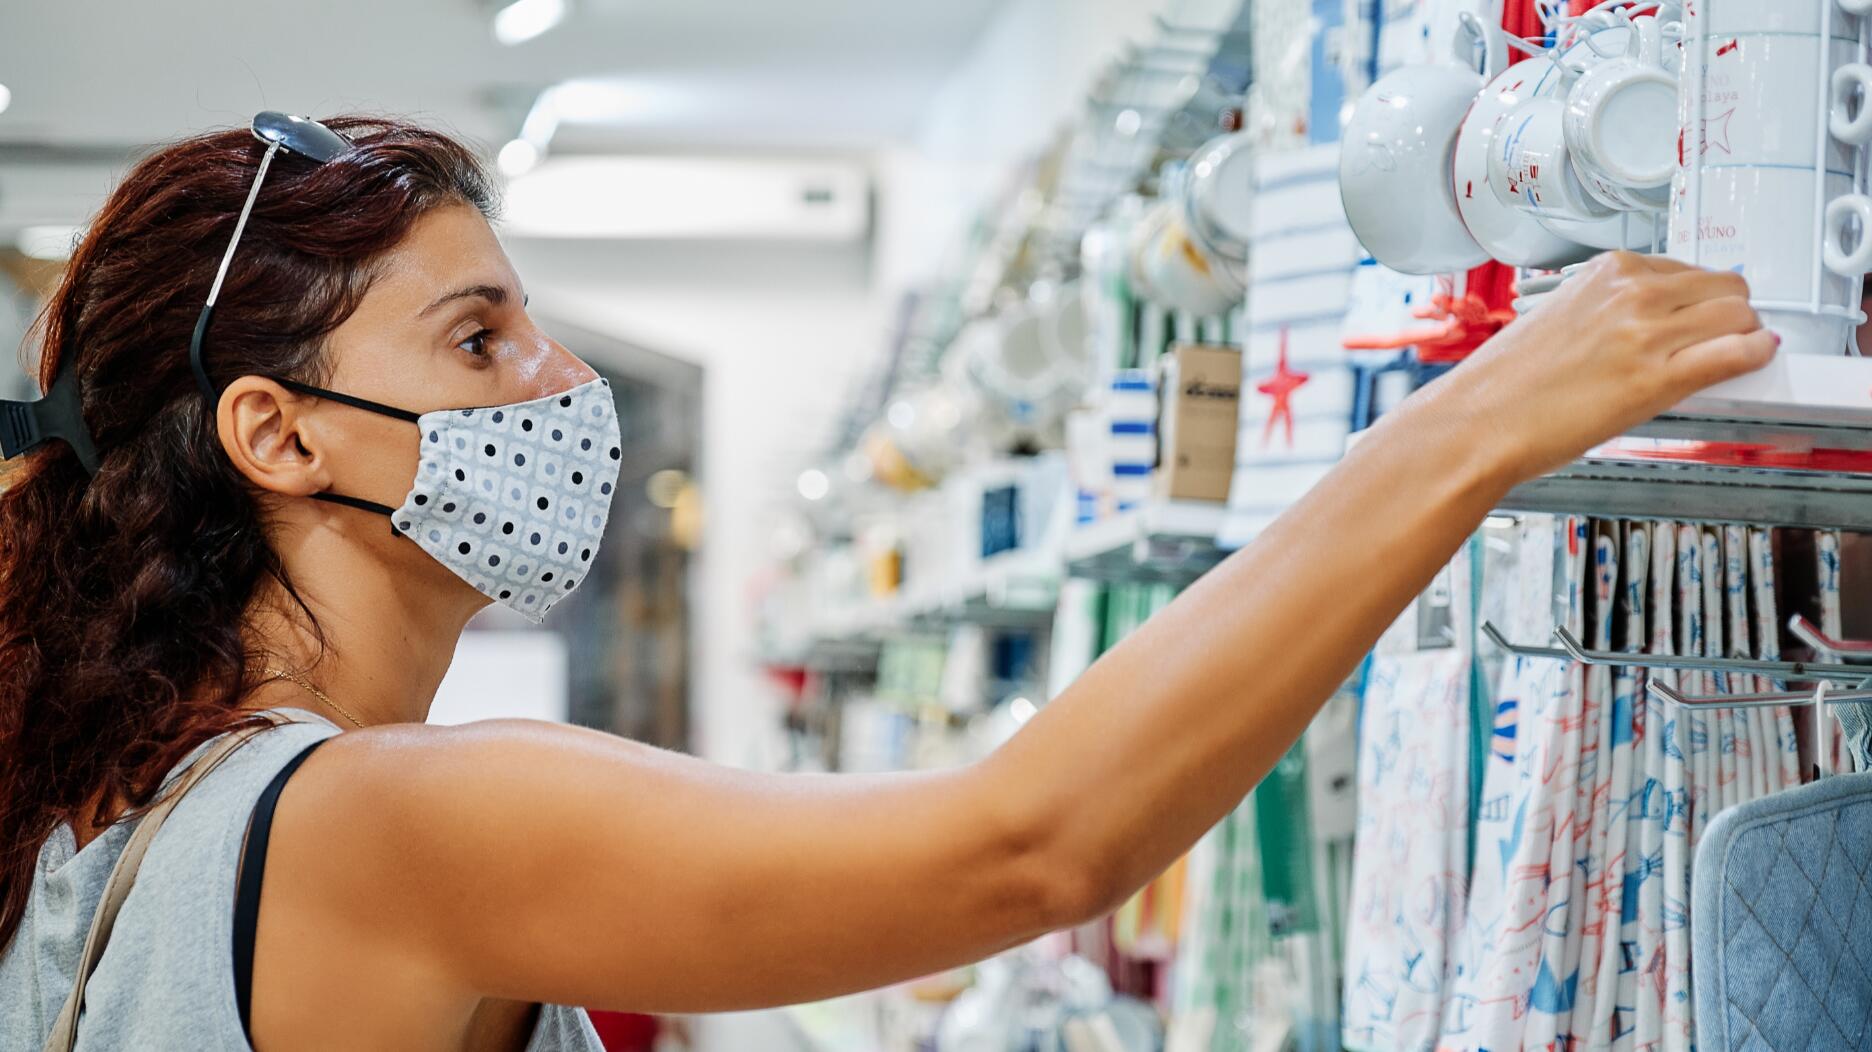 Retailers Need Clarity on Updated Mask Guidance, Says NRF